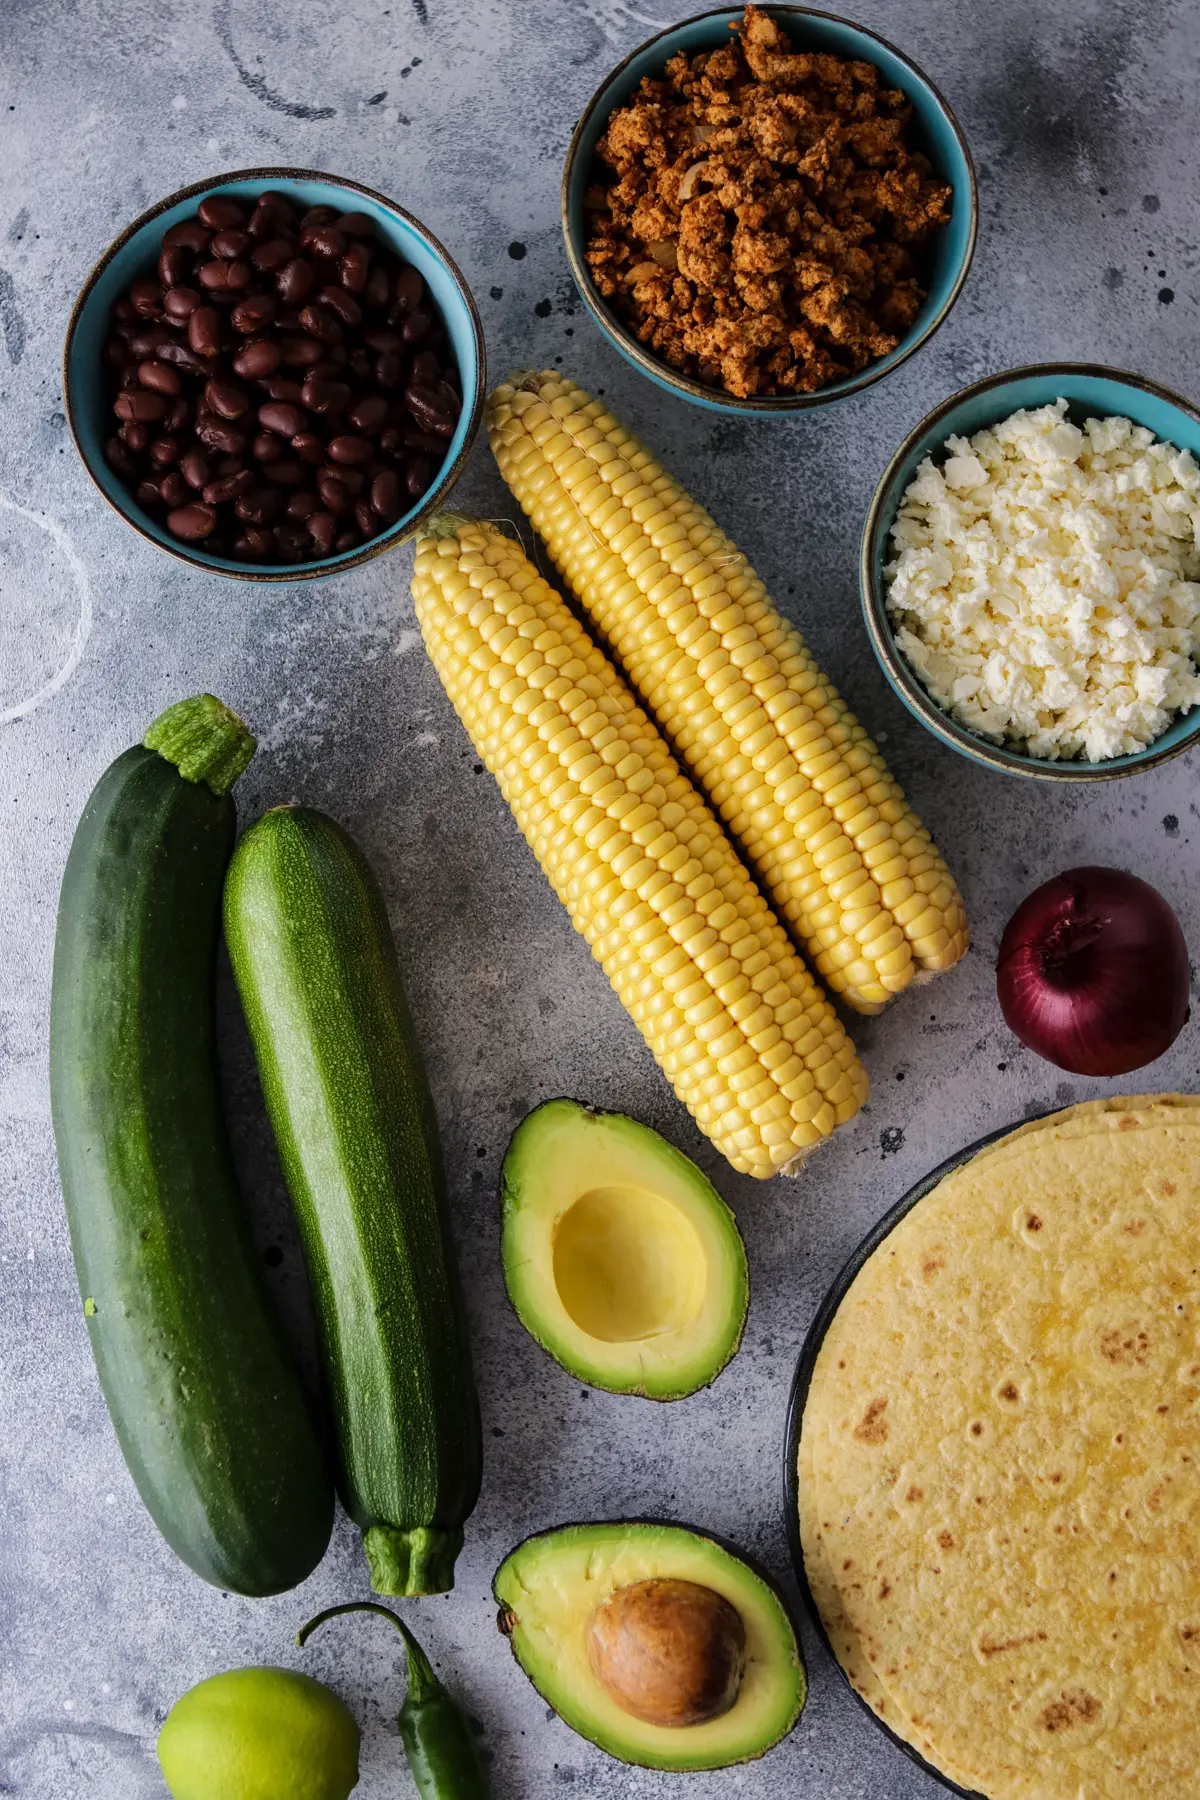 Ingredients for grilled tacos including zucchini, corn, avocado, tempeh taco meat, feta cheese, black beans, tortillas, etc.